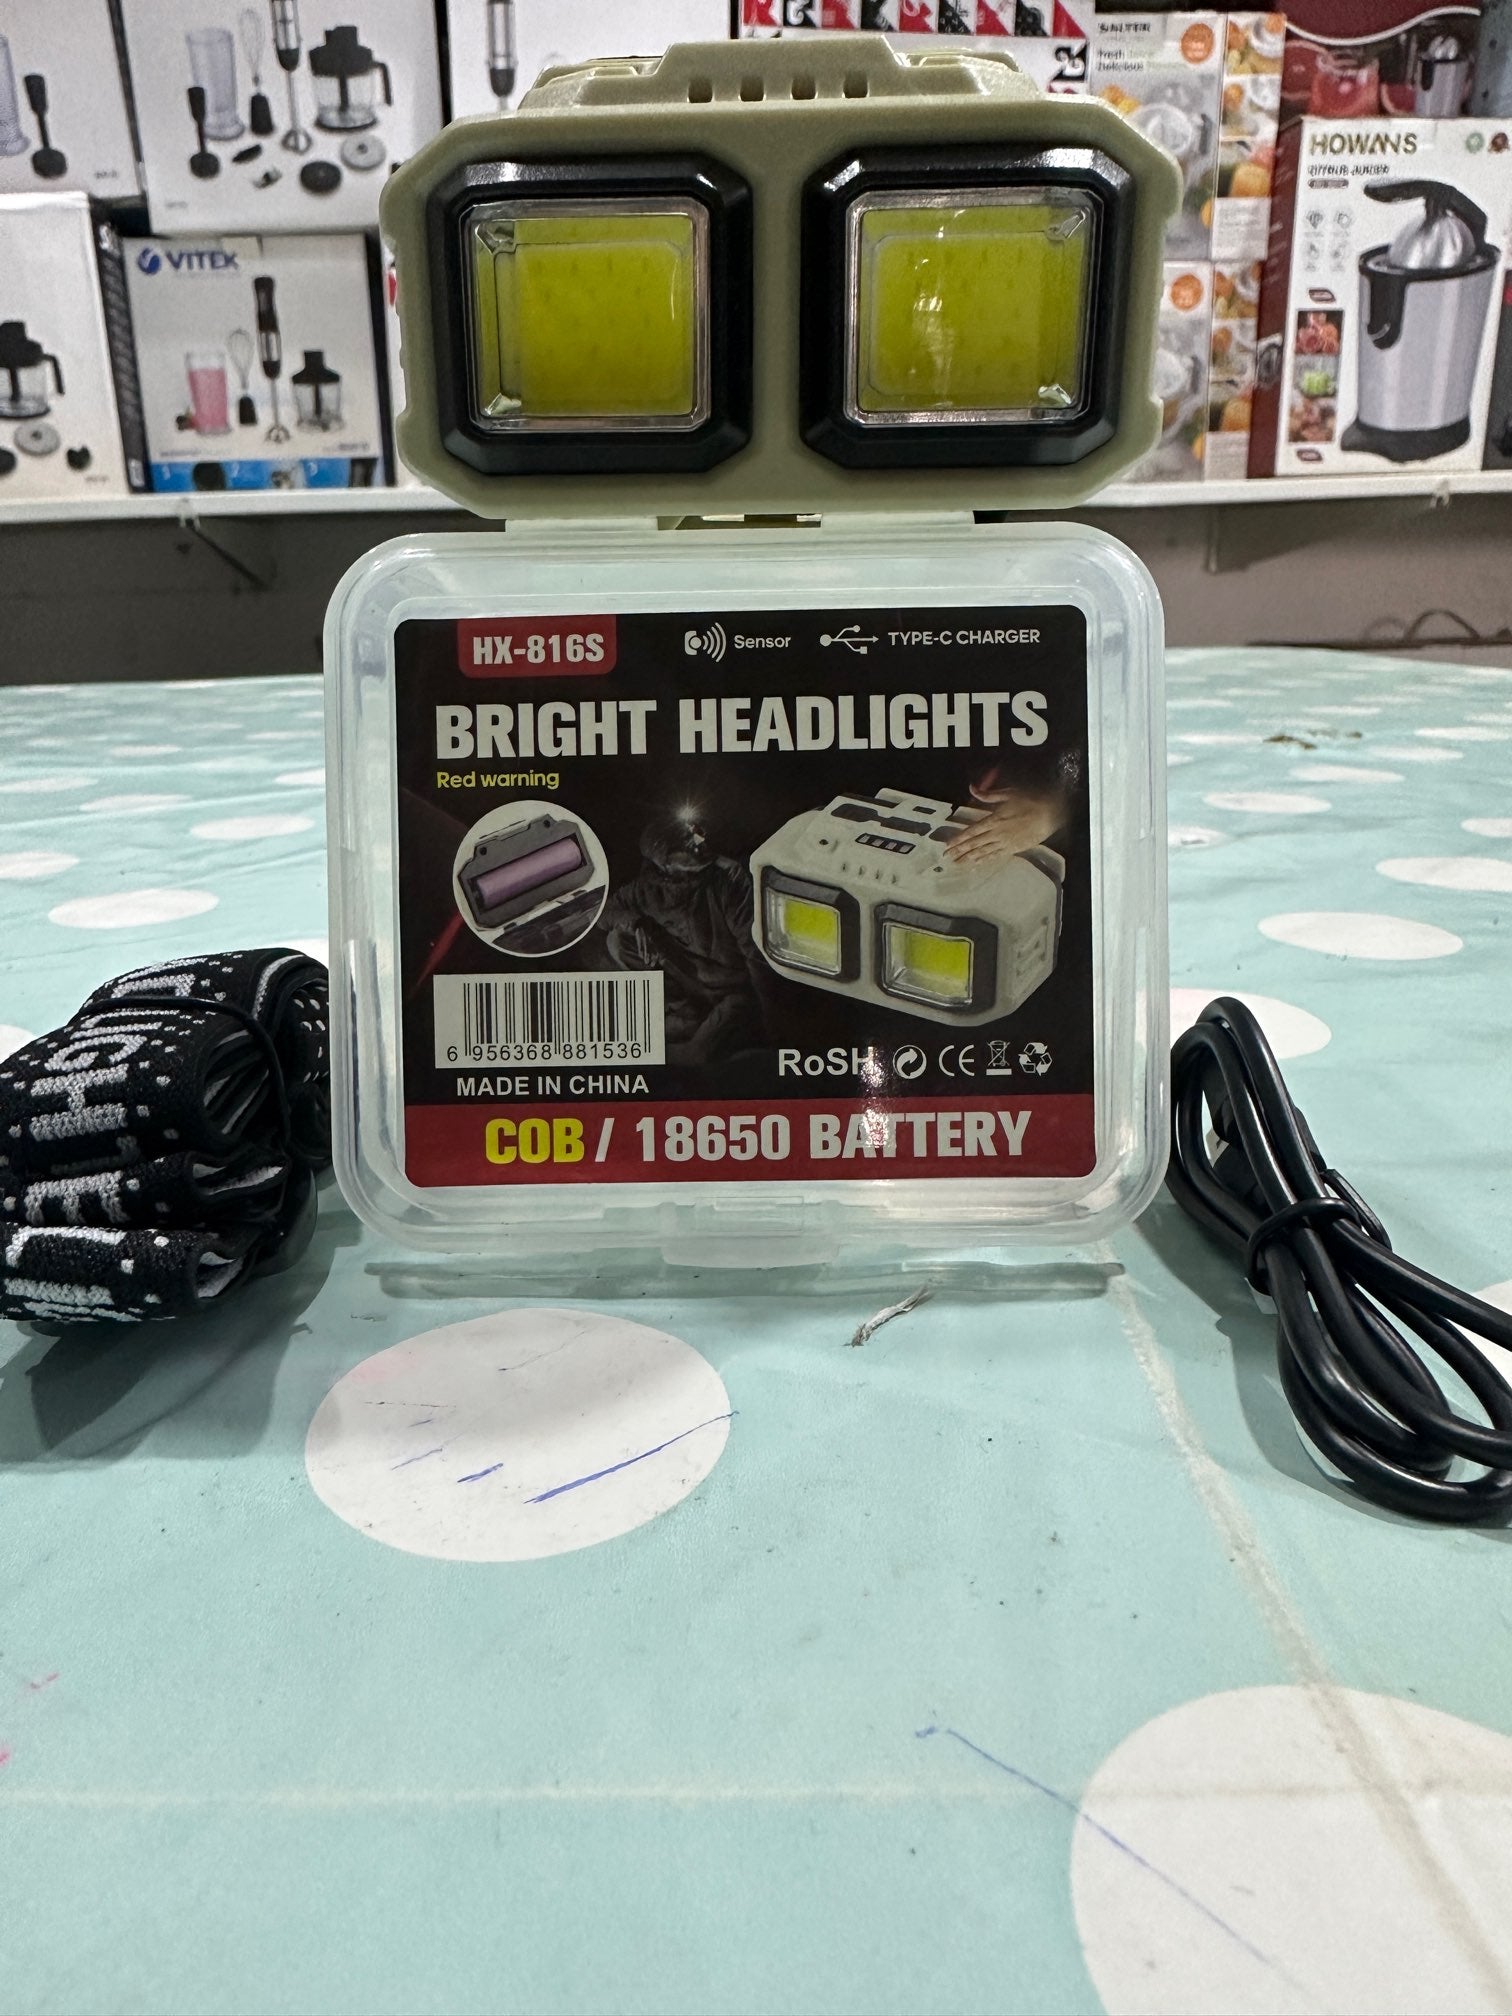 Lot imported Bright HeadLights with sensor